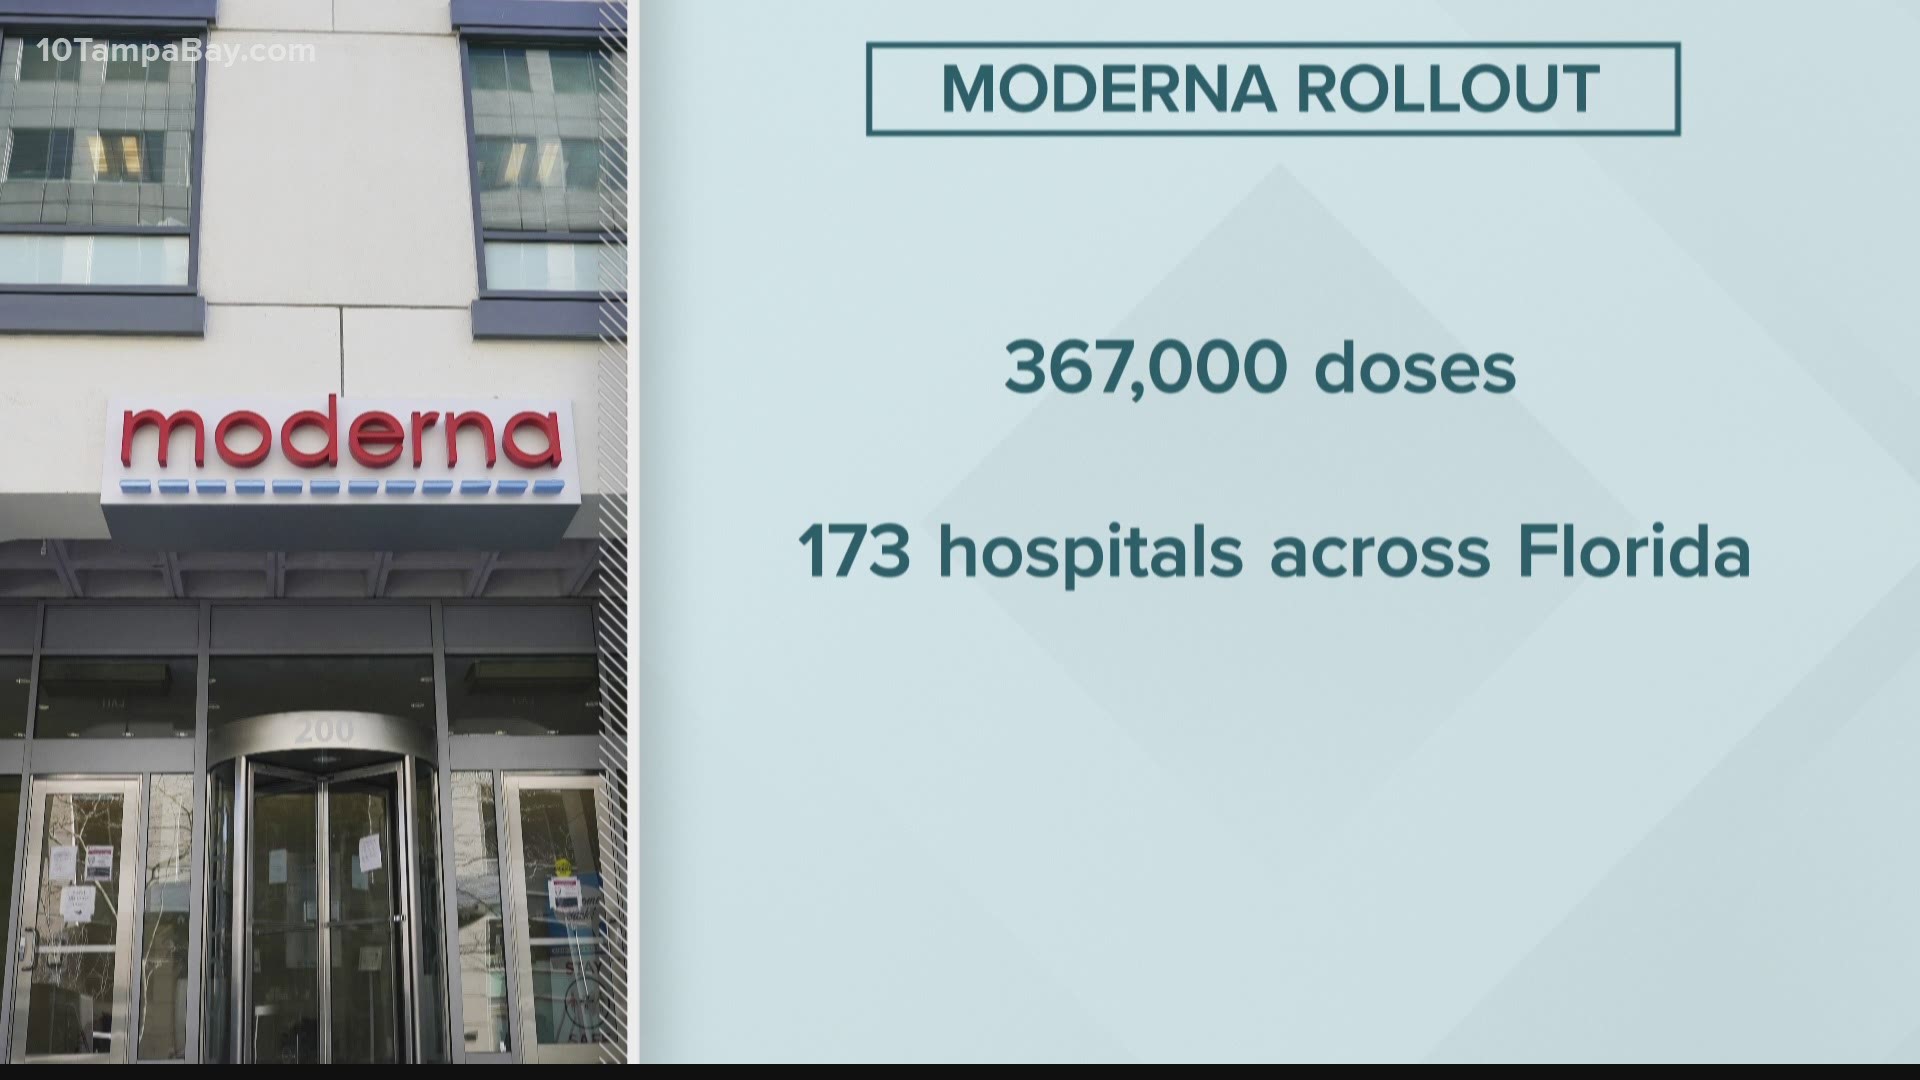 Now, Moderna's COVID-19 vaccine will just need full FDA approval for emergency use.